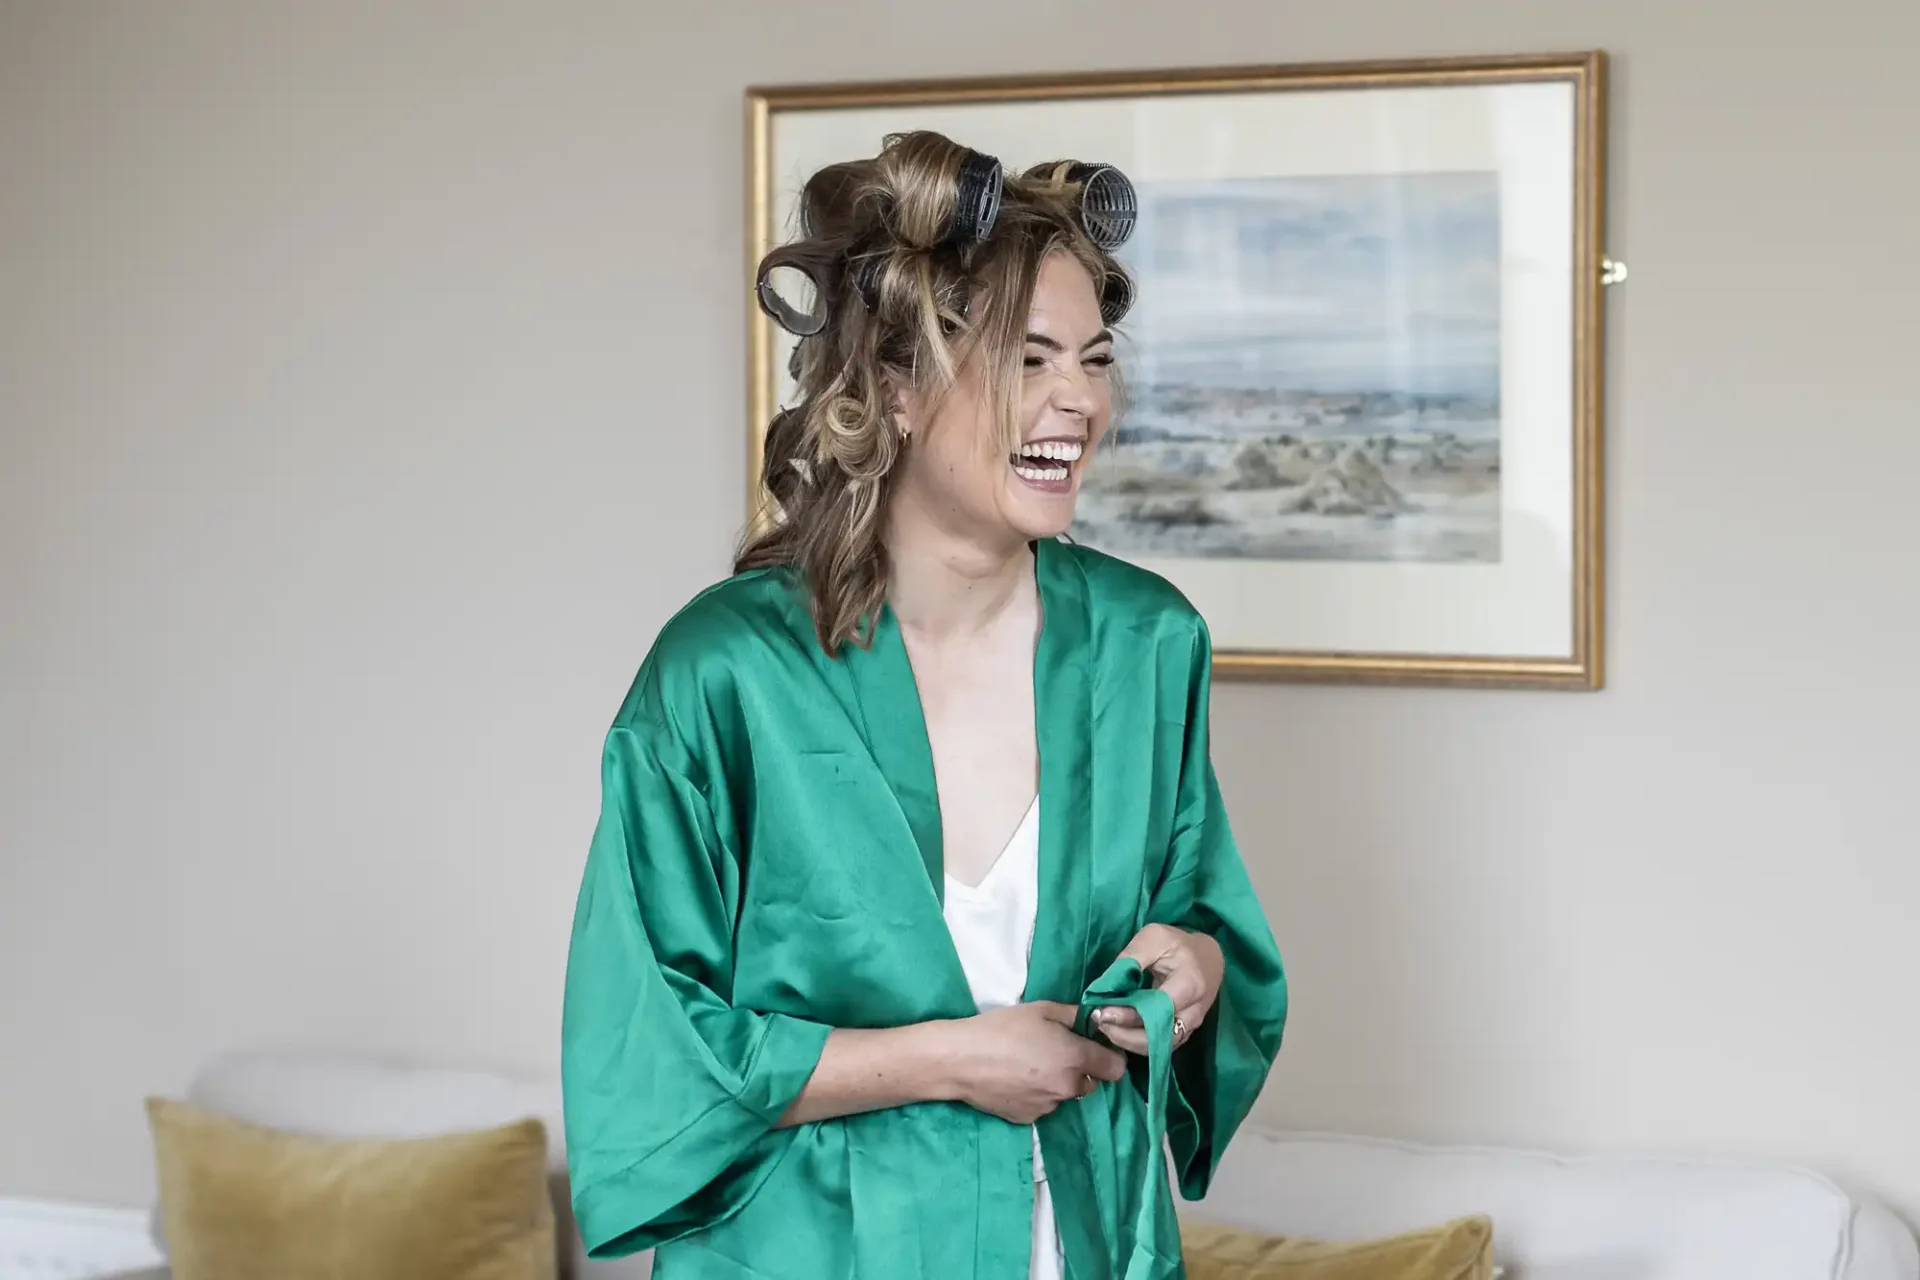 A woman with curlers in her hair, wearing a green robe, smiles broadly in a room with a framed seascape painting on the wall behind her.